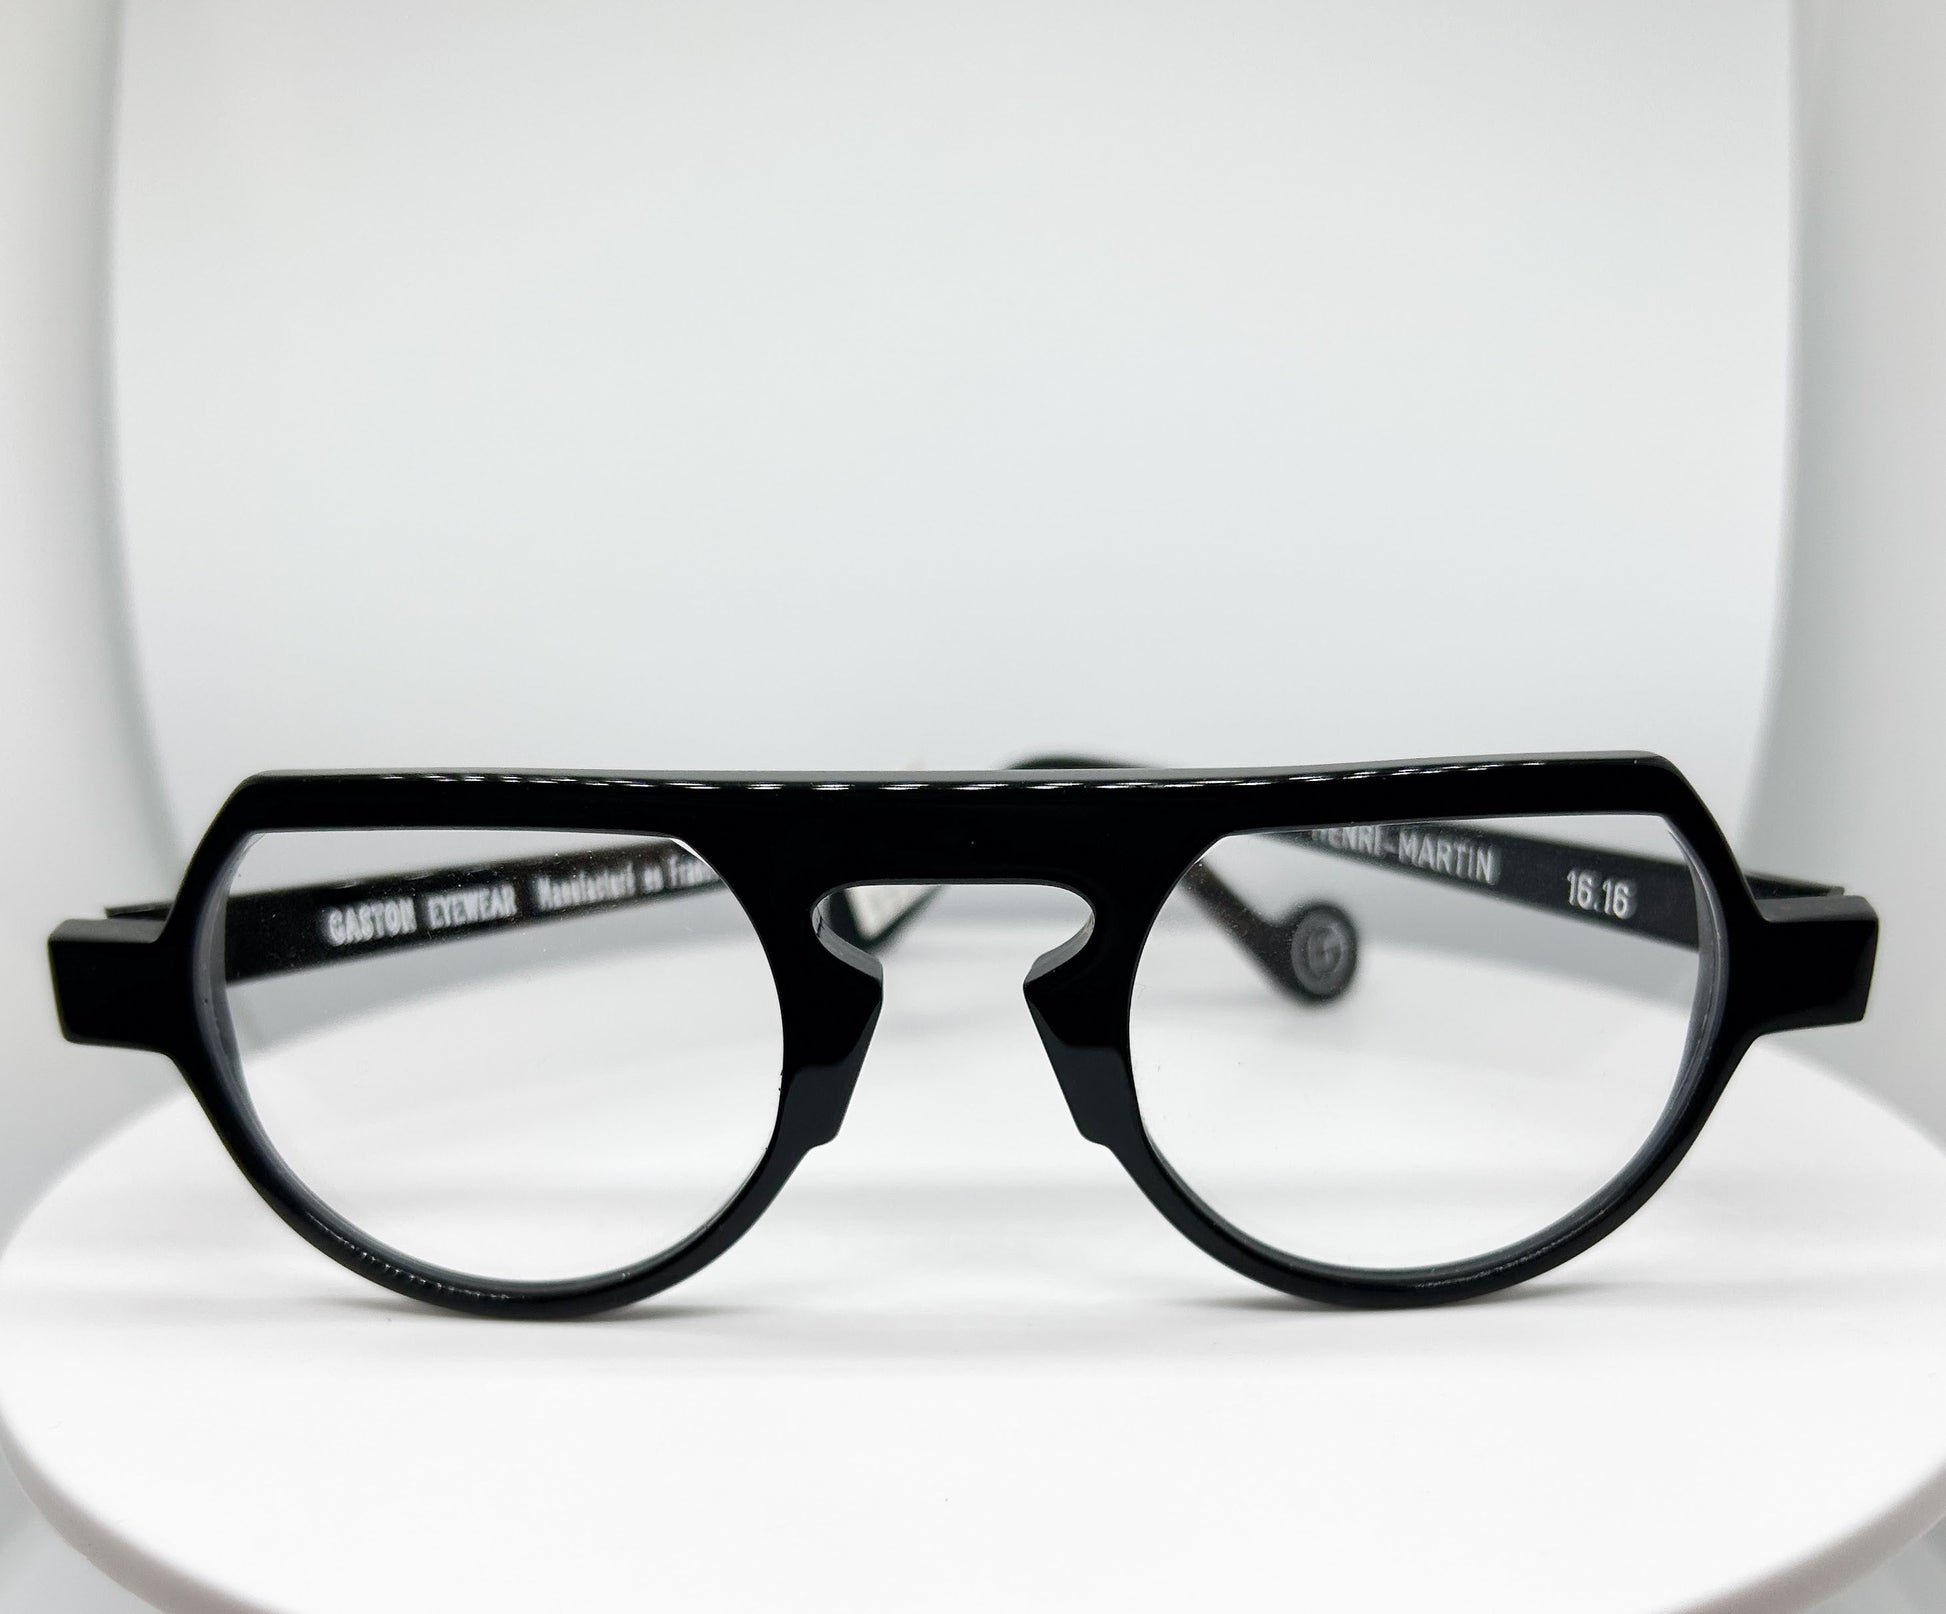 Buy Gaston Eyewear - Henri Martin, a  Black; Acetate Optical Frame with a Round with Flat Top shape. An Authorized Dealer, Adair Eyewear has a 40+ Years History of Customer Service Excellence